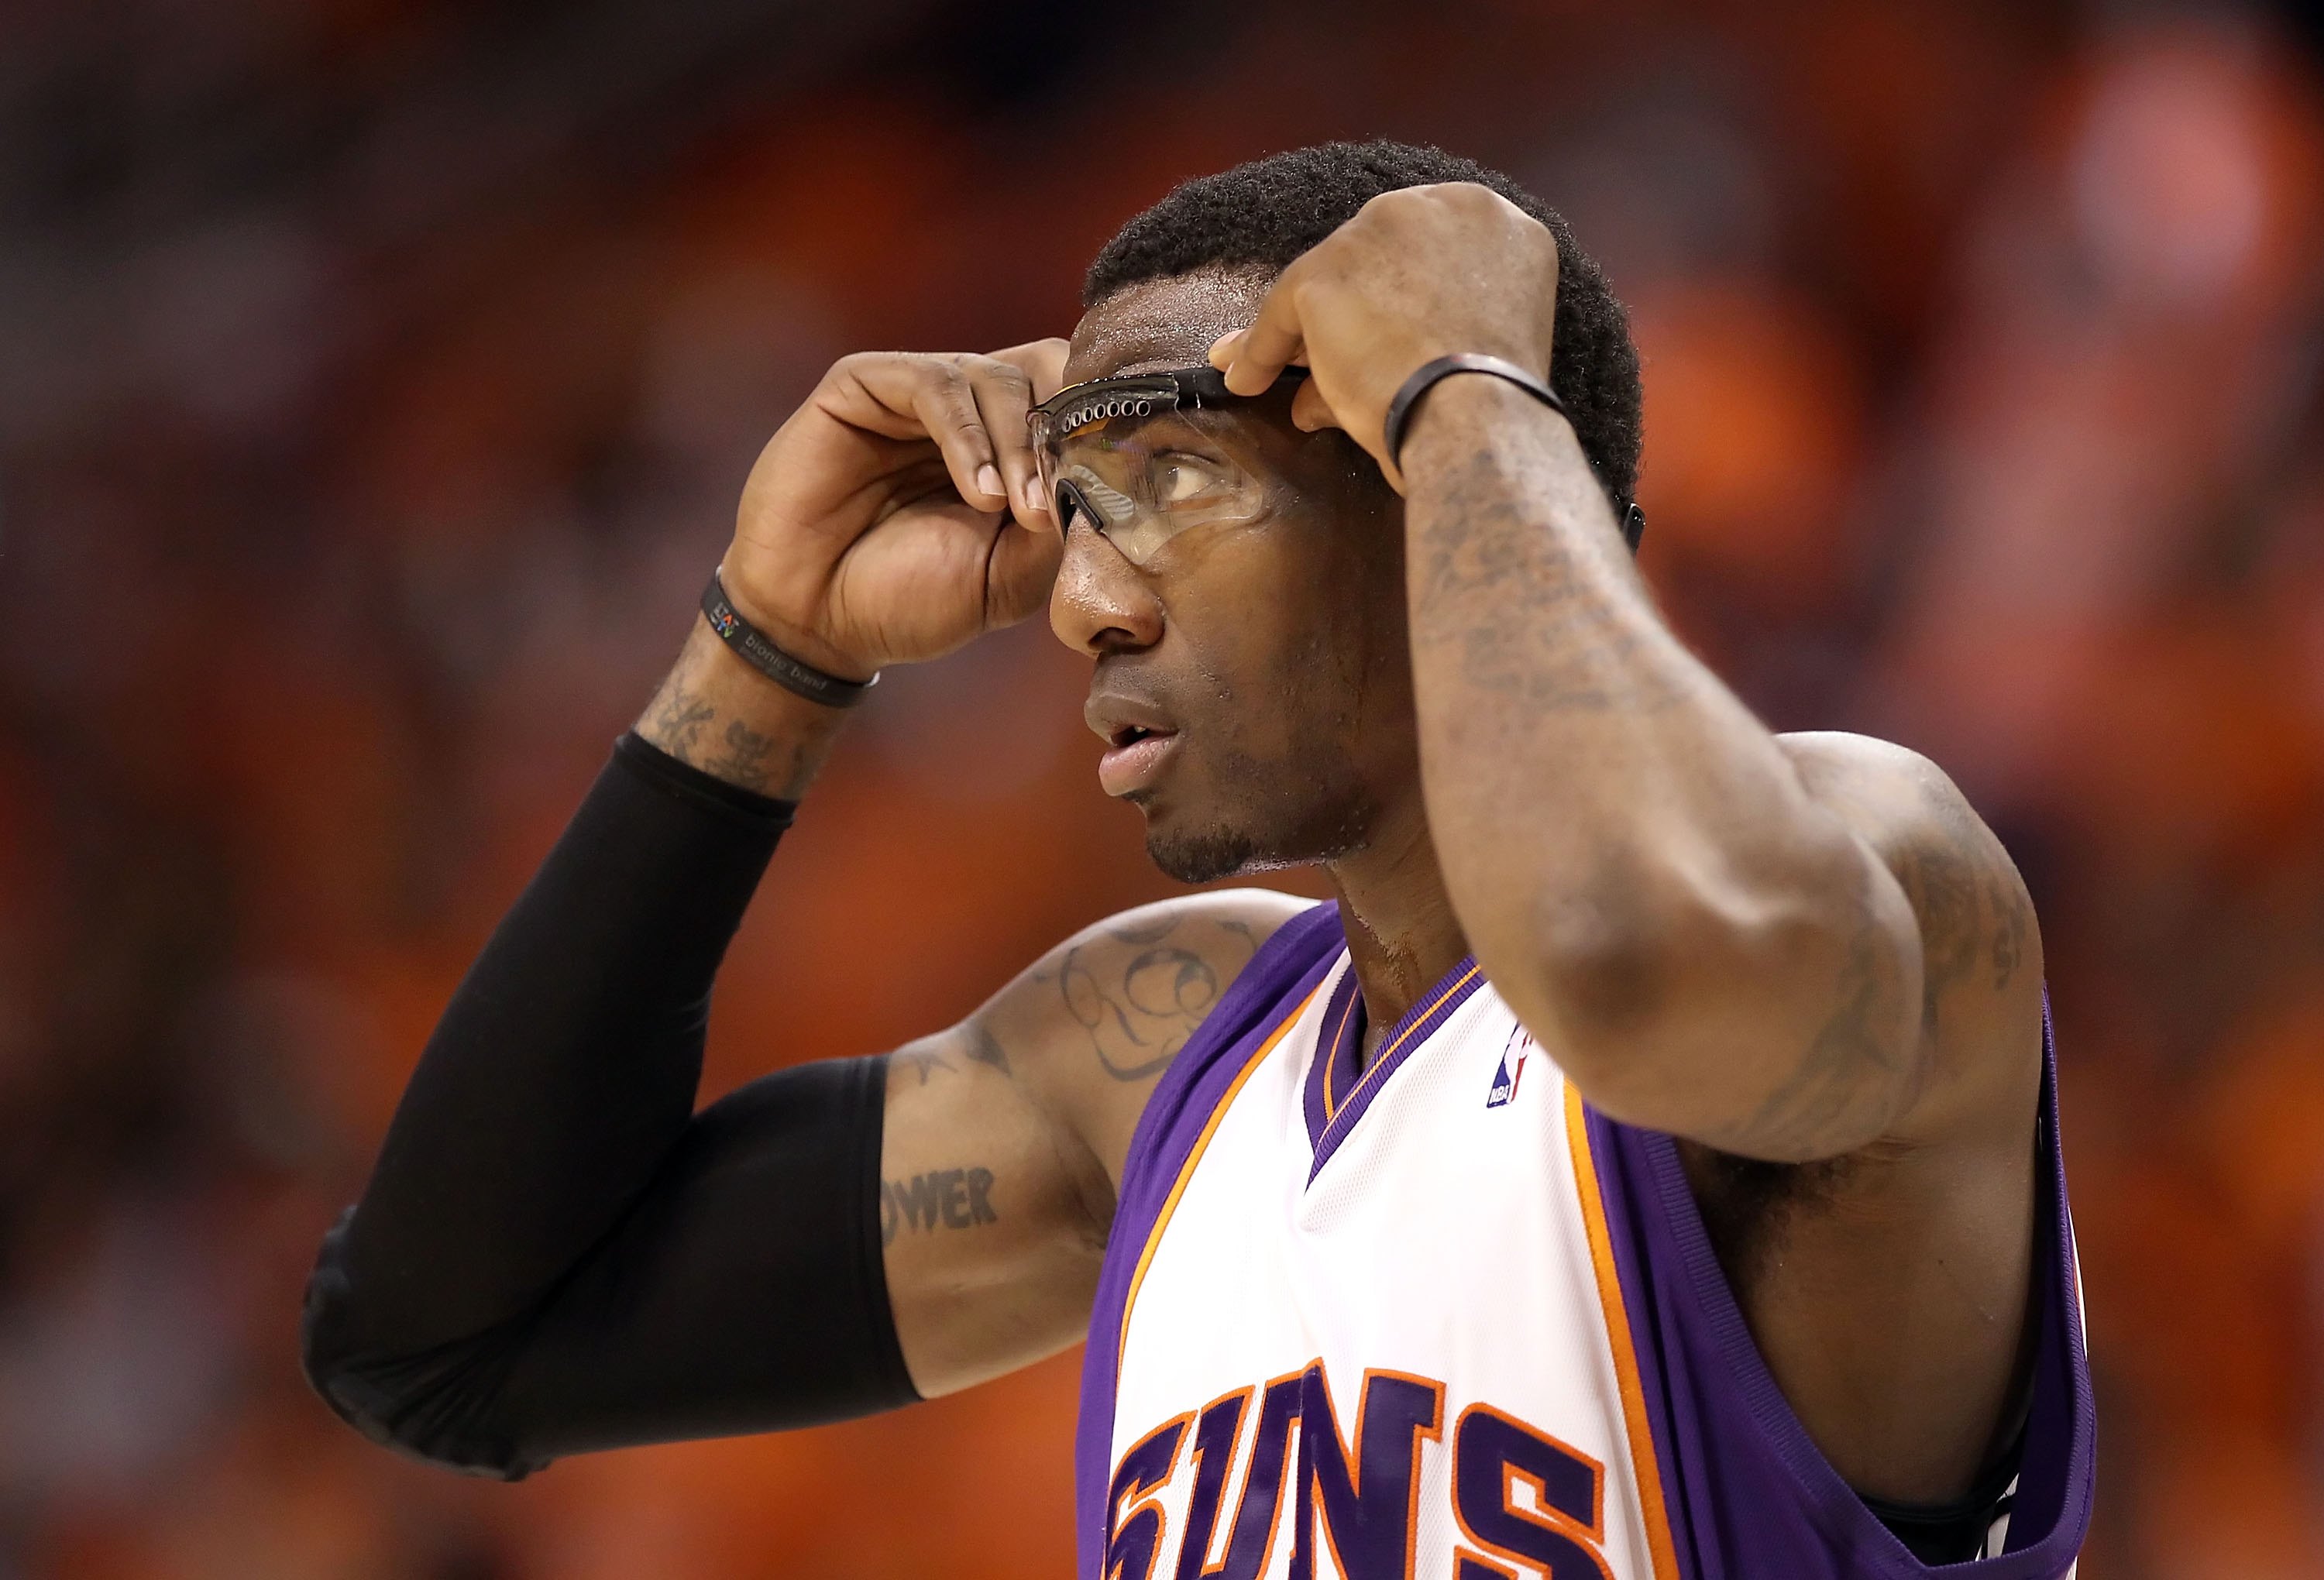 Why is Amar'e Stoudemire not in the Ring Of Honor?